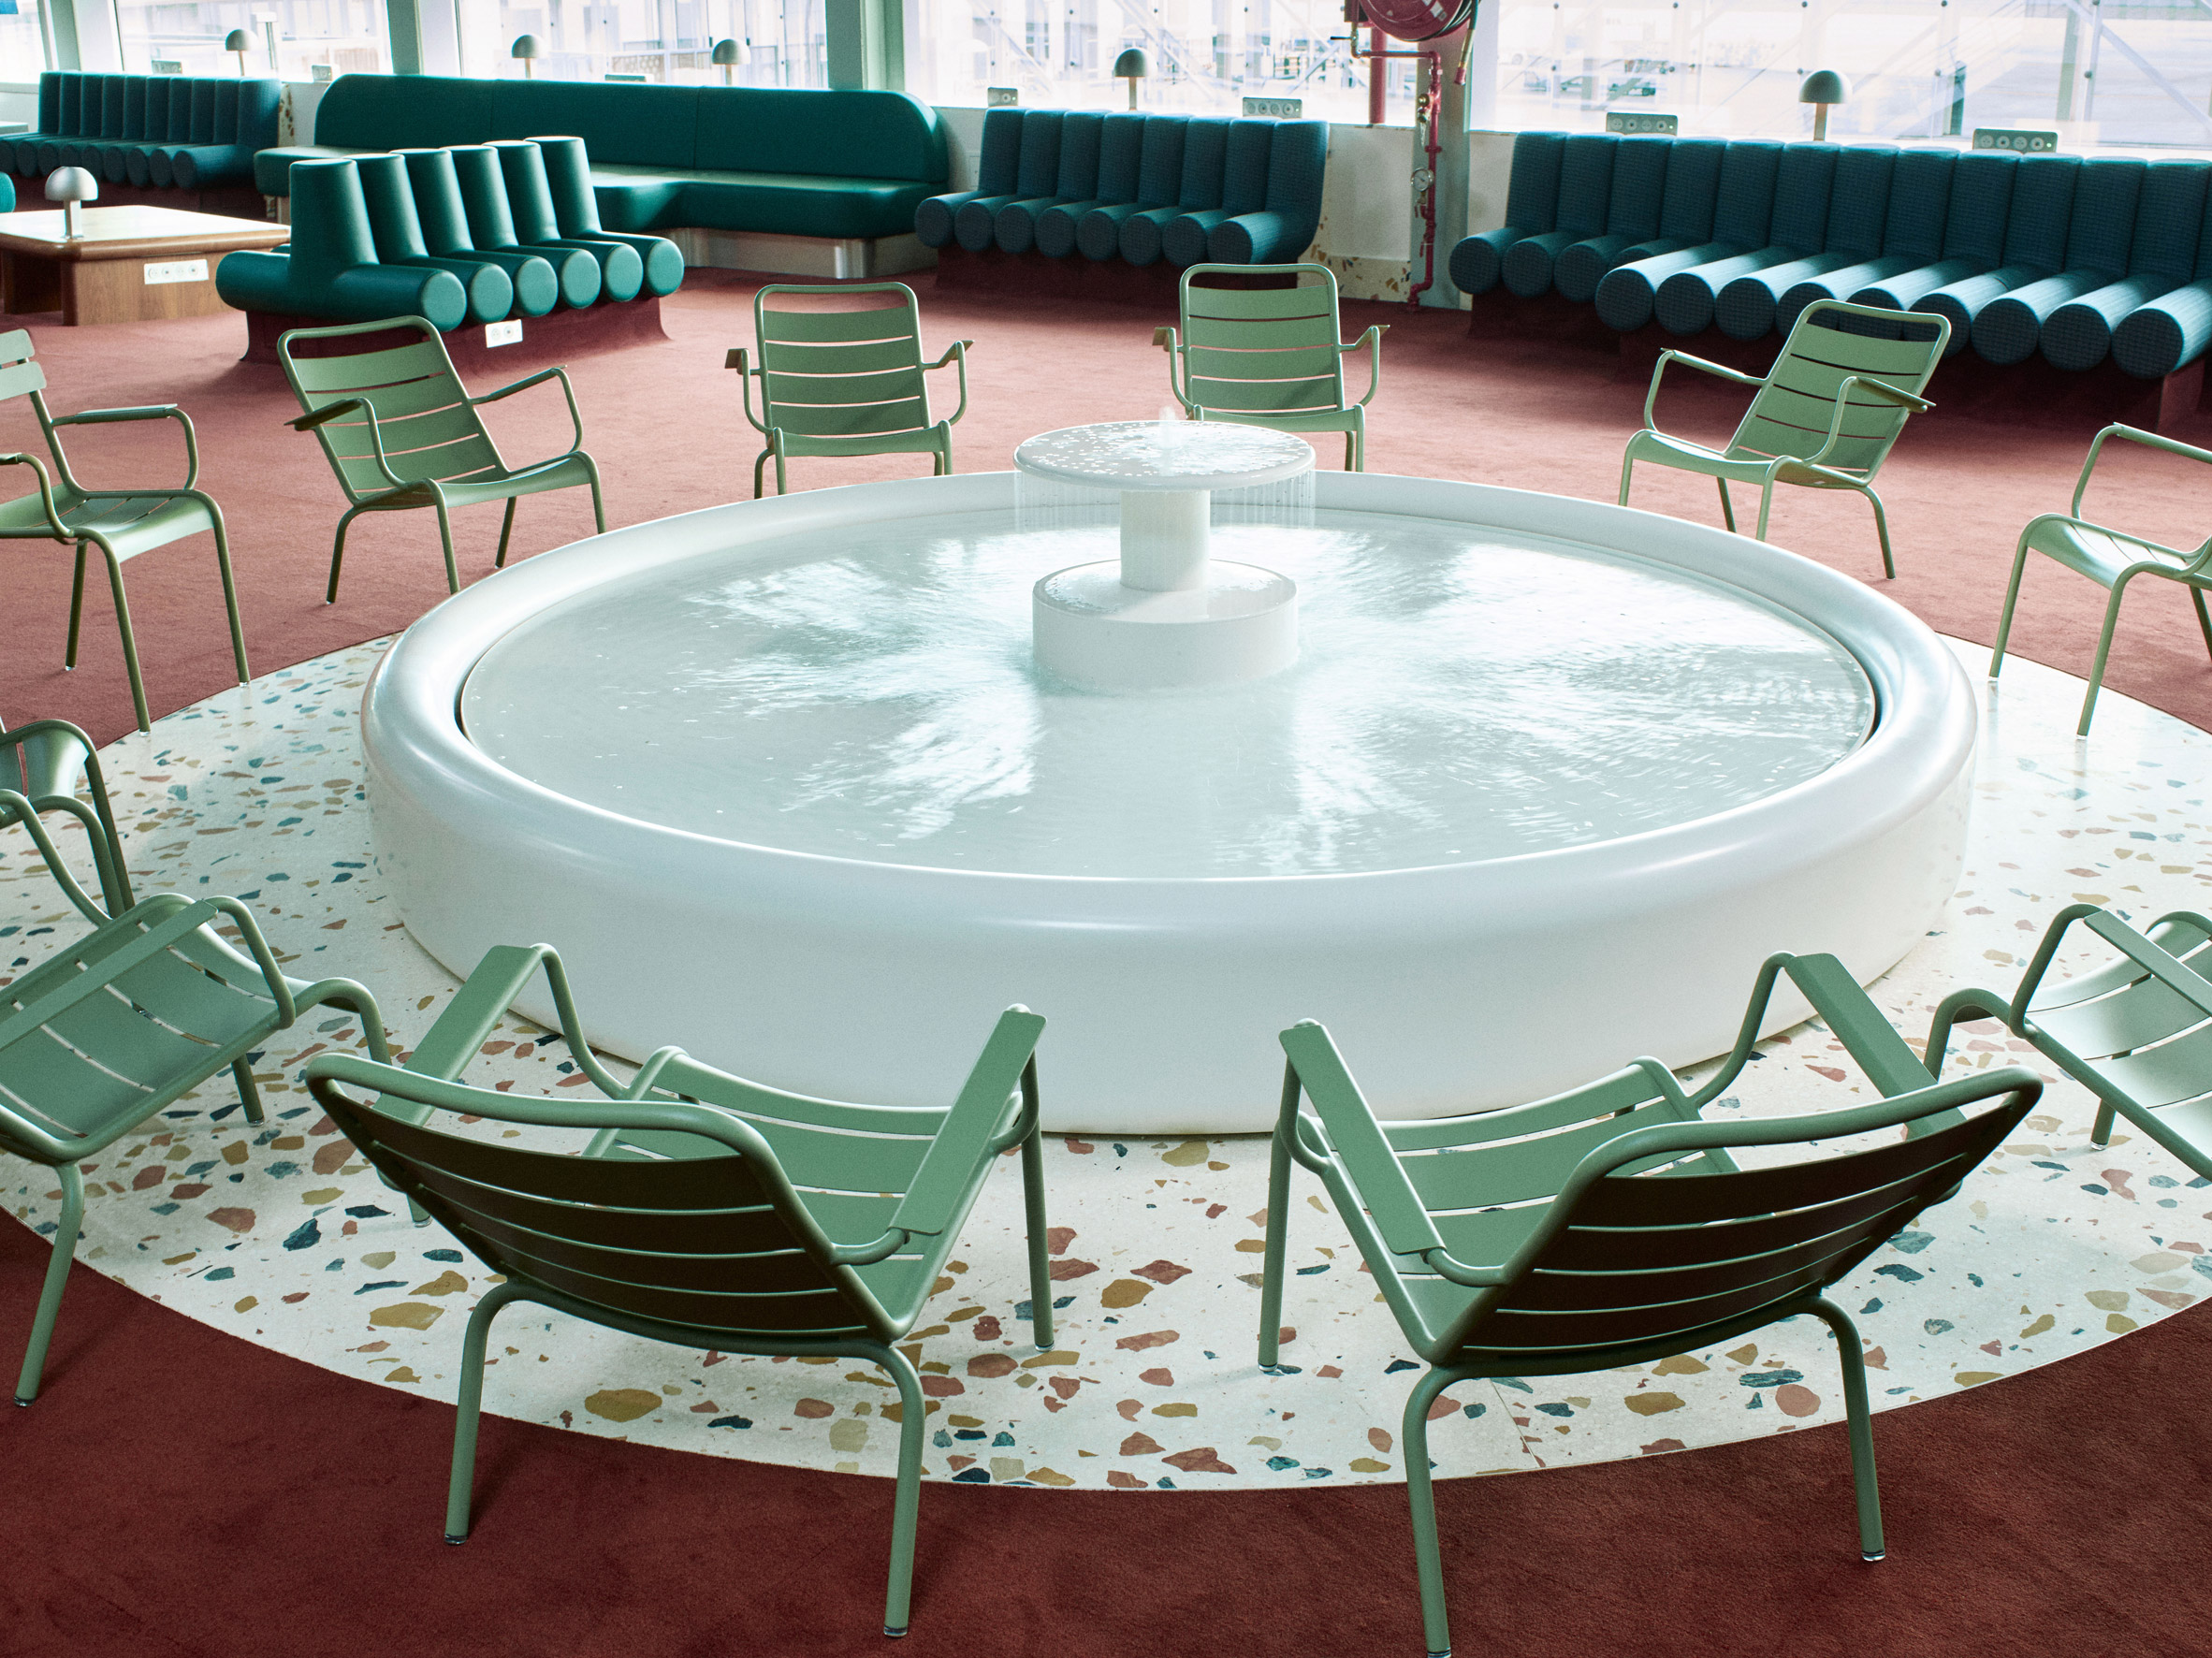 Photograph showing airport departure lounge with green chairs, white fountain and terrazzo flooring